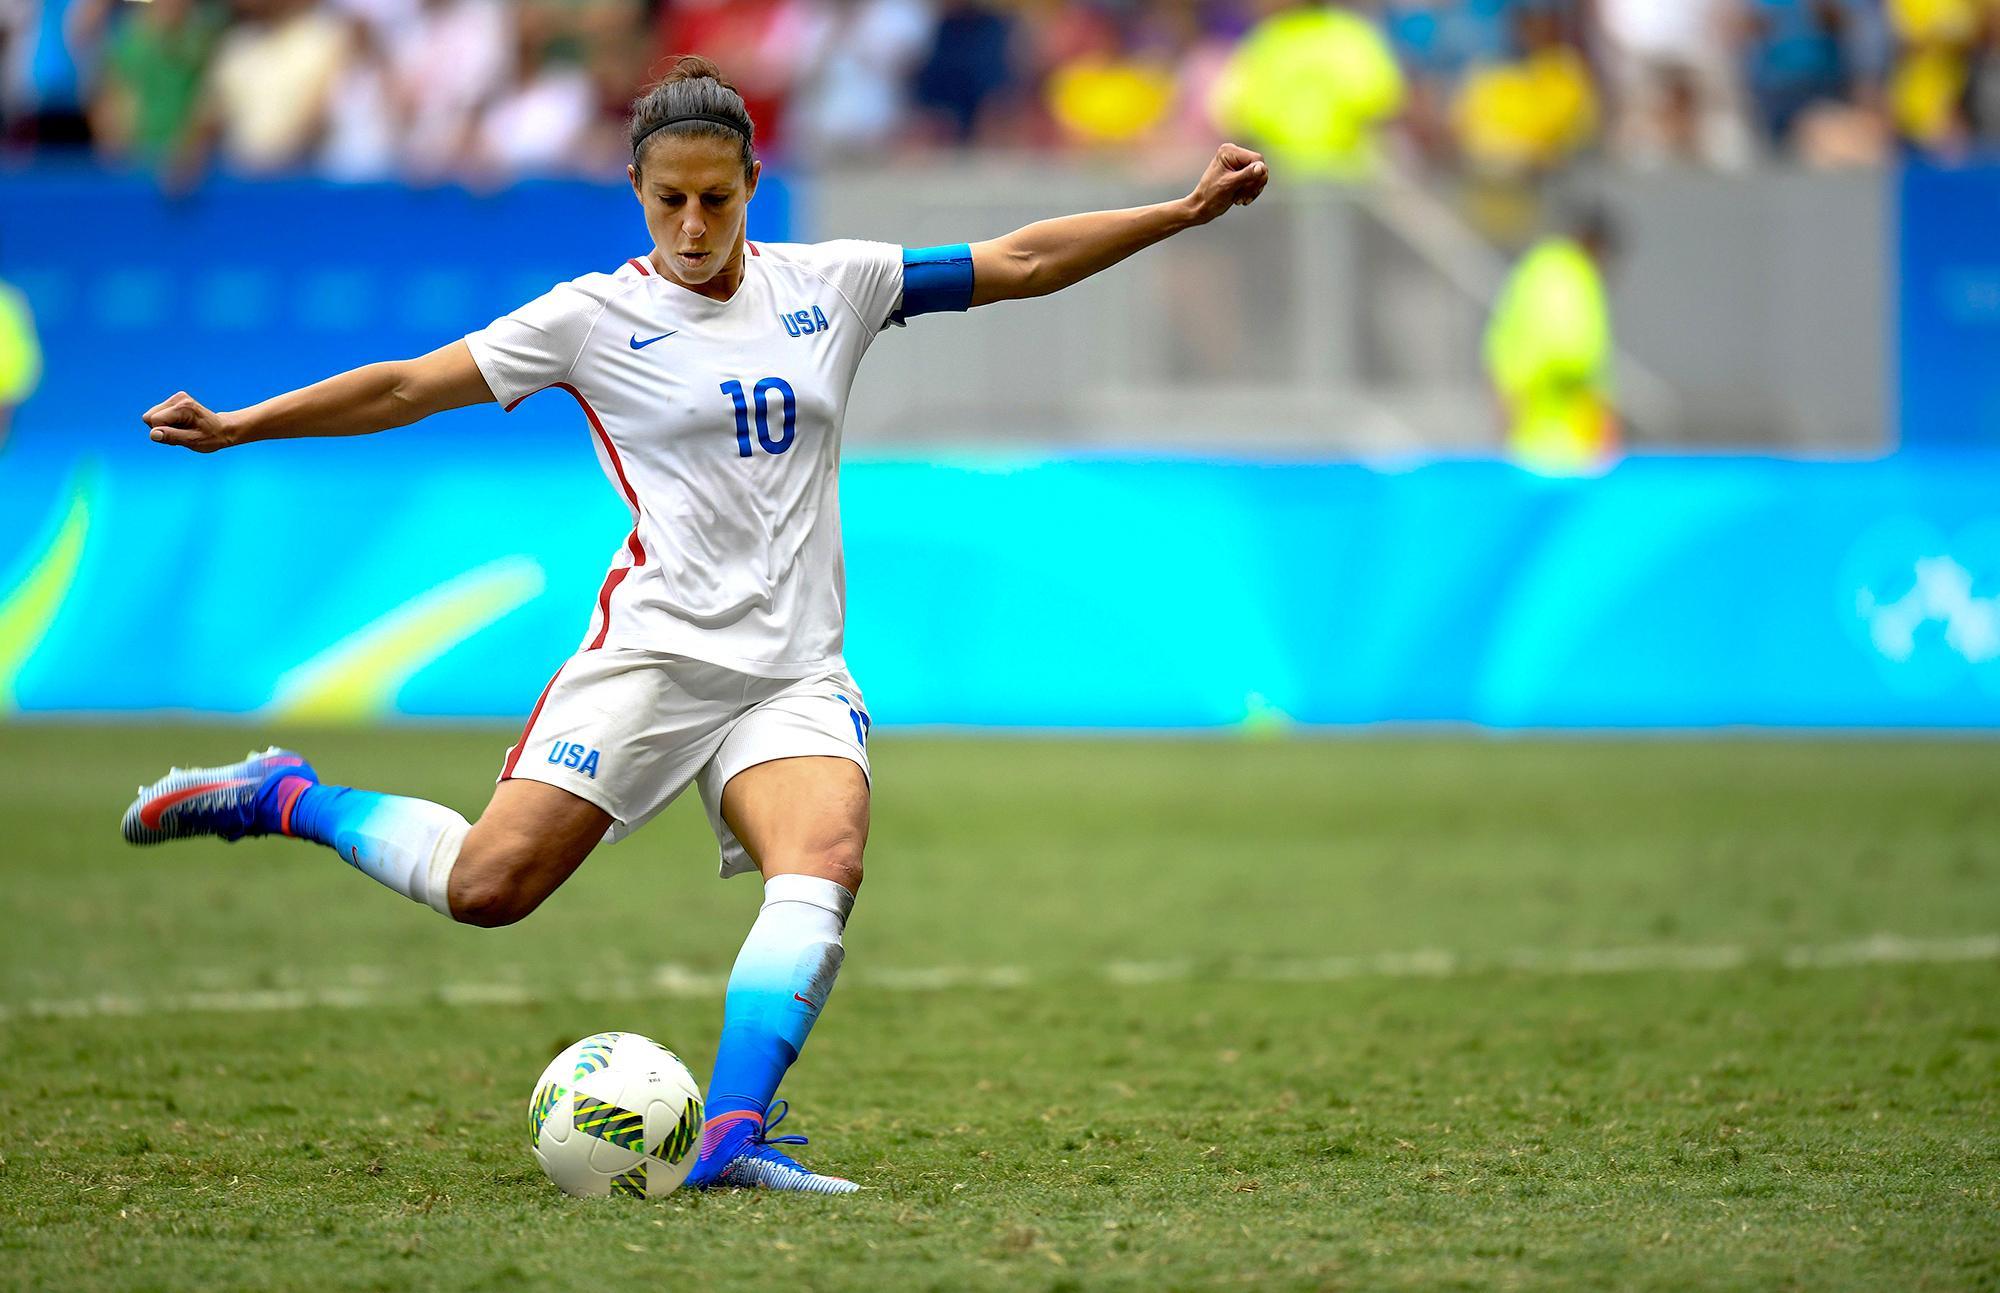 Soccer Star Carli Lloyd: 9 Things You Don't Know About Me